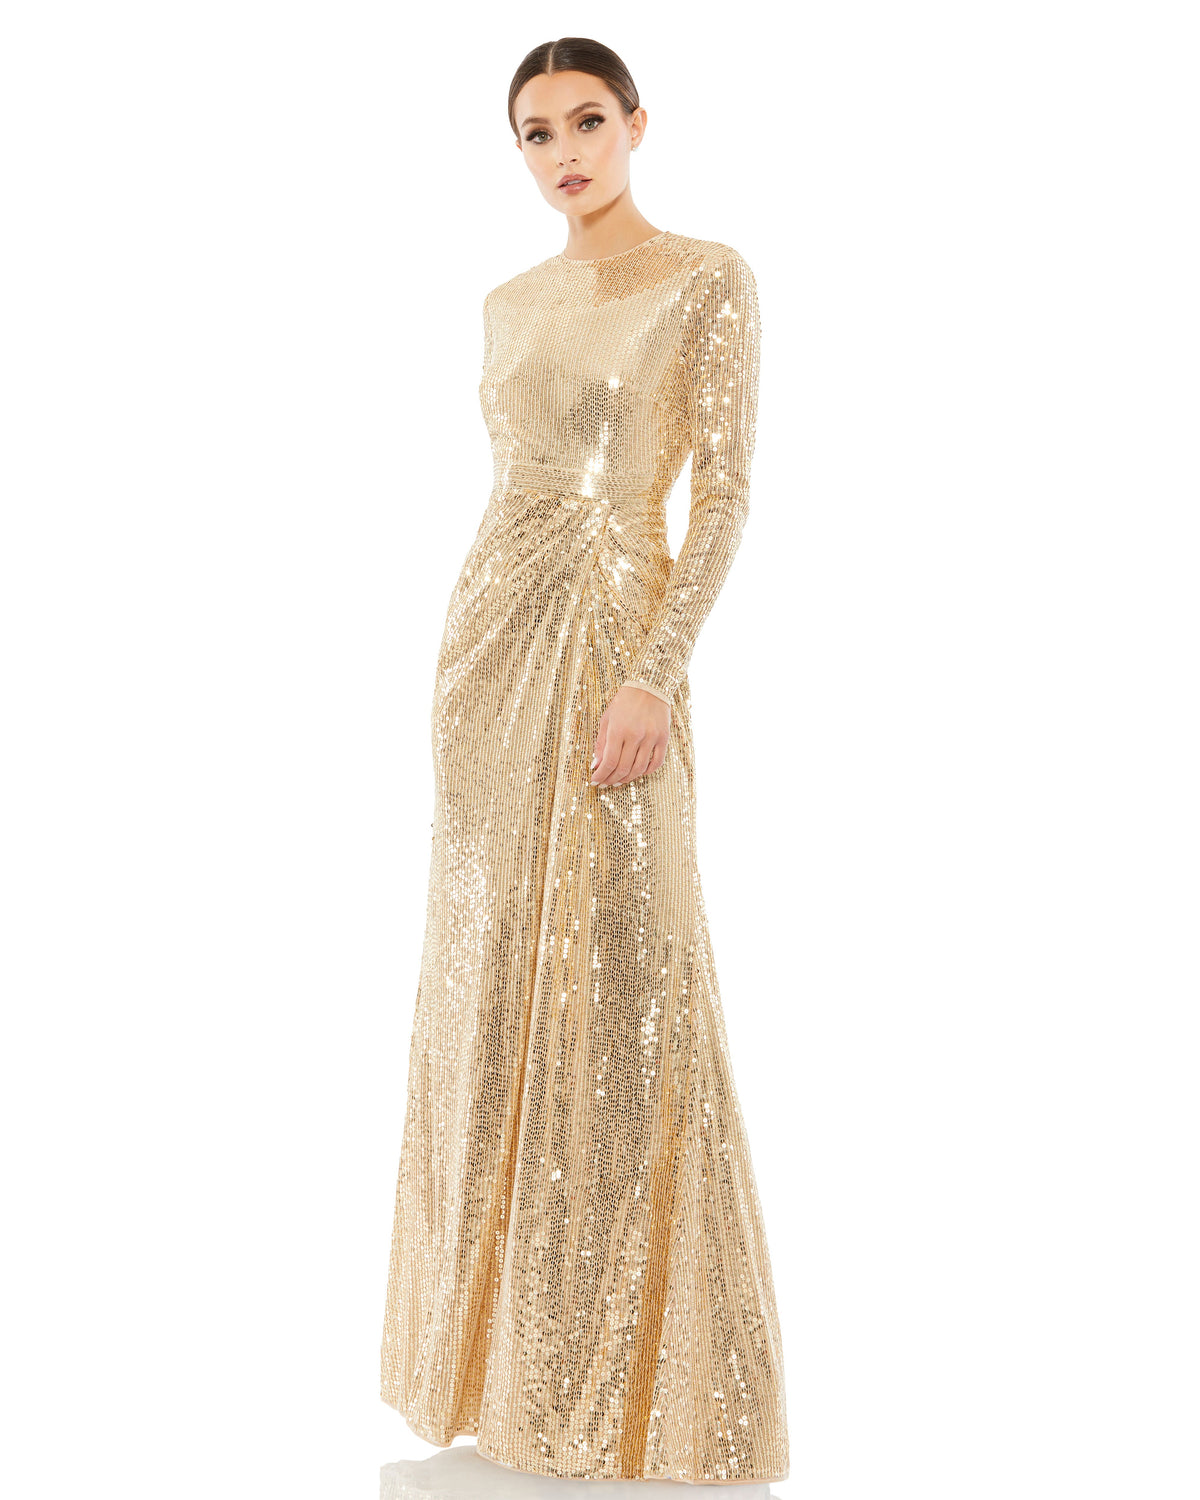 This elegant Mac Duggal, long, gold, hand-sequined gown is a fashion-forward choice for any formal affair. With a high round neckline, long sleeves, and a floor-grazing skirt, this modest silhouette is accented by a draped skirt and inset waist detail. Sleeves feature hidden zippers for ease of dressing. This elegant evening dress is the perfect dress perfect for proms, black-tie affairs, weddings and special events!